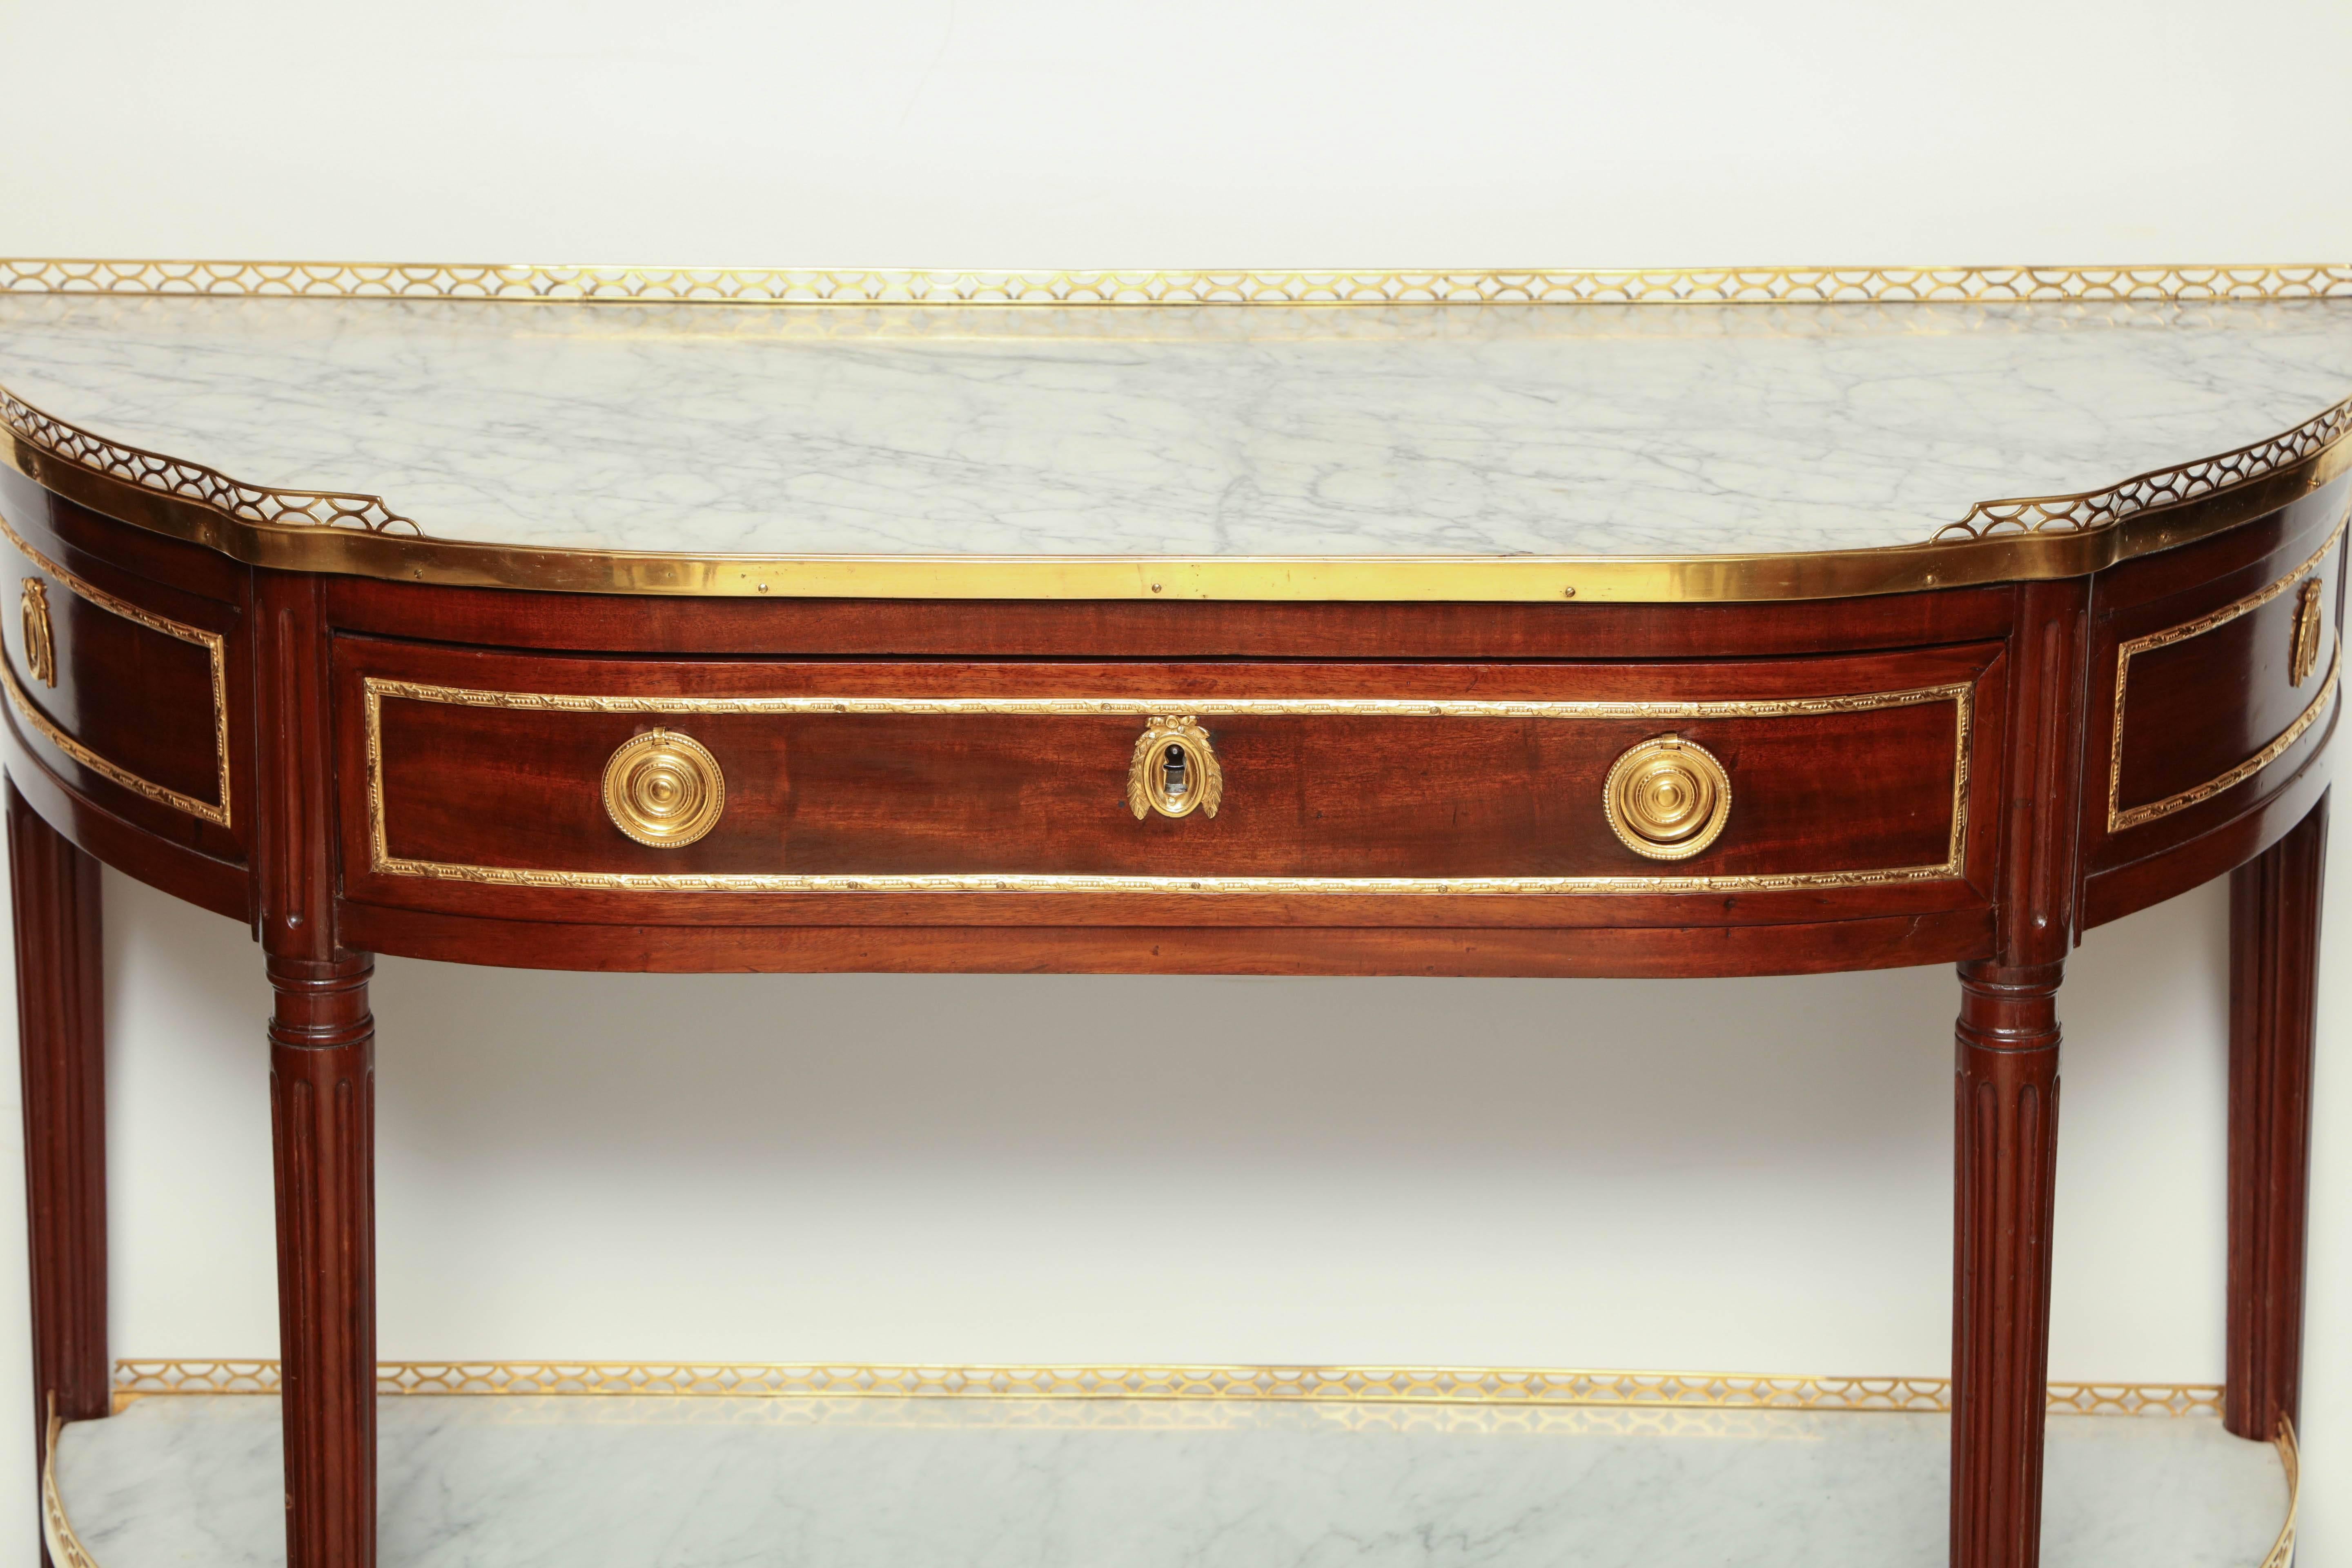 A fine French Louis XVI marble top mahogany demilune console dessérte. With pierced bronze gallery, frieze drawer and marble top shelf stretcher base.